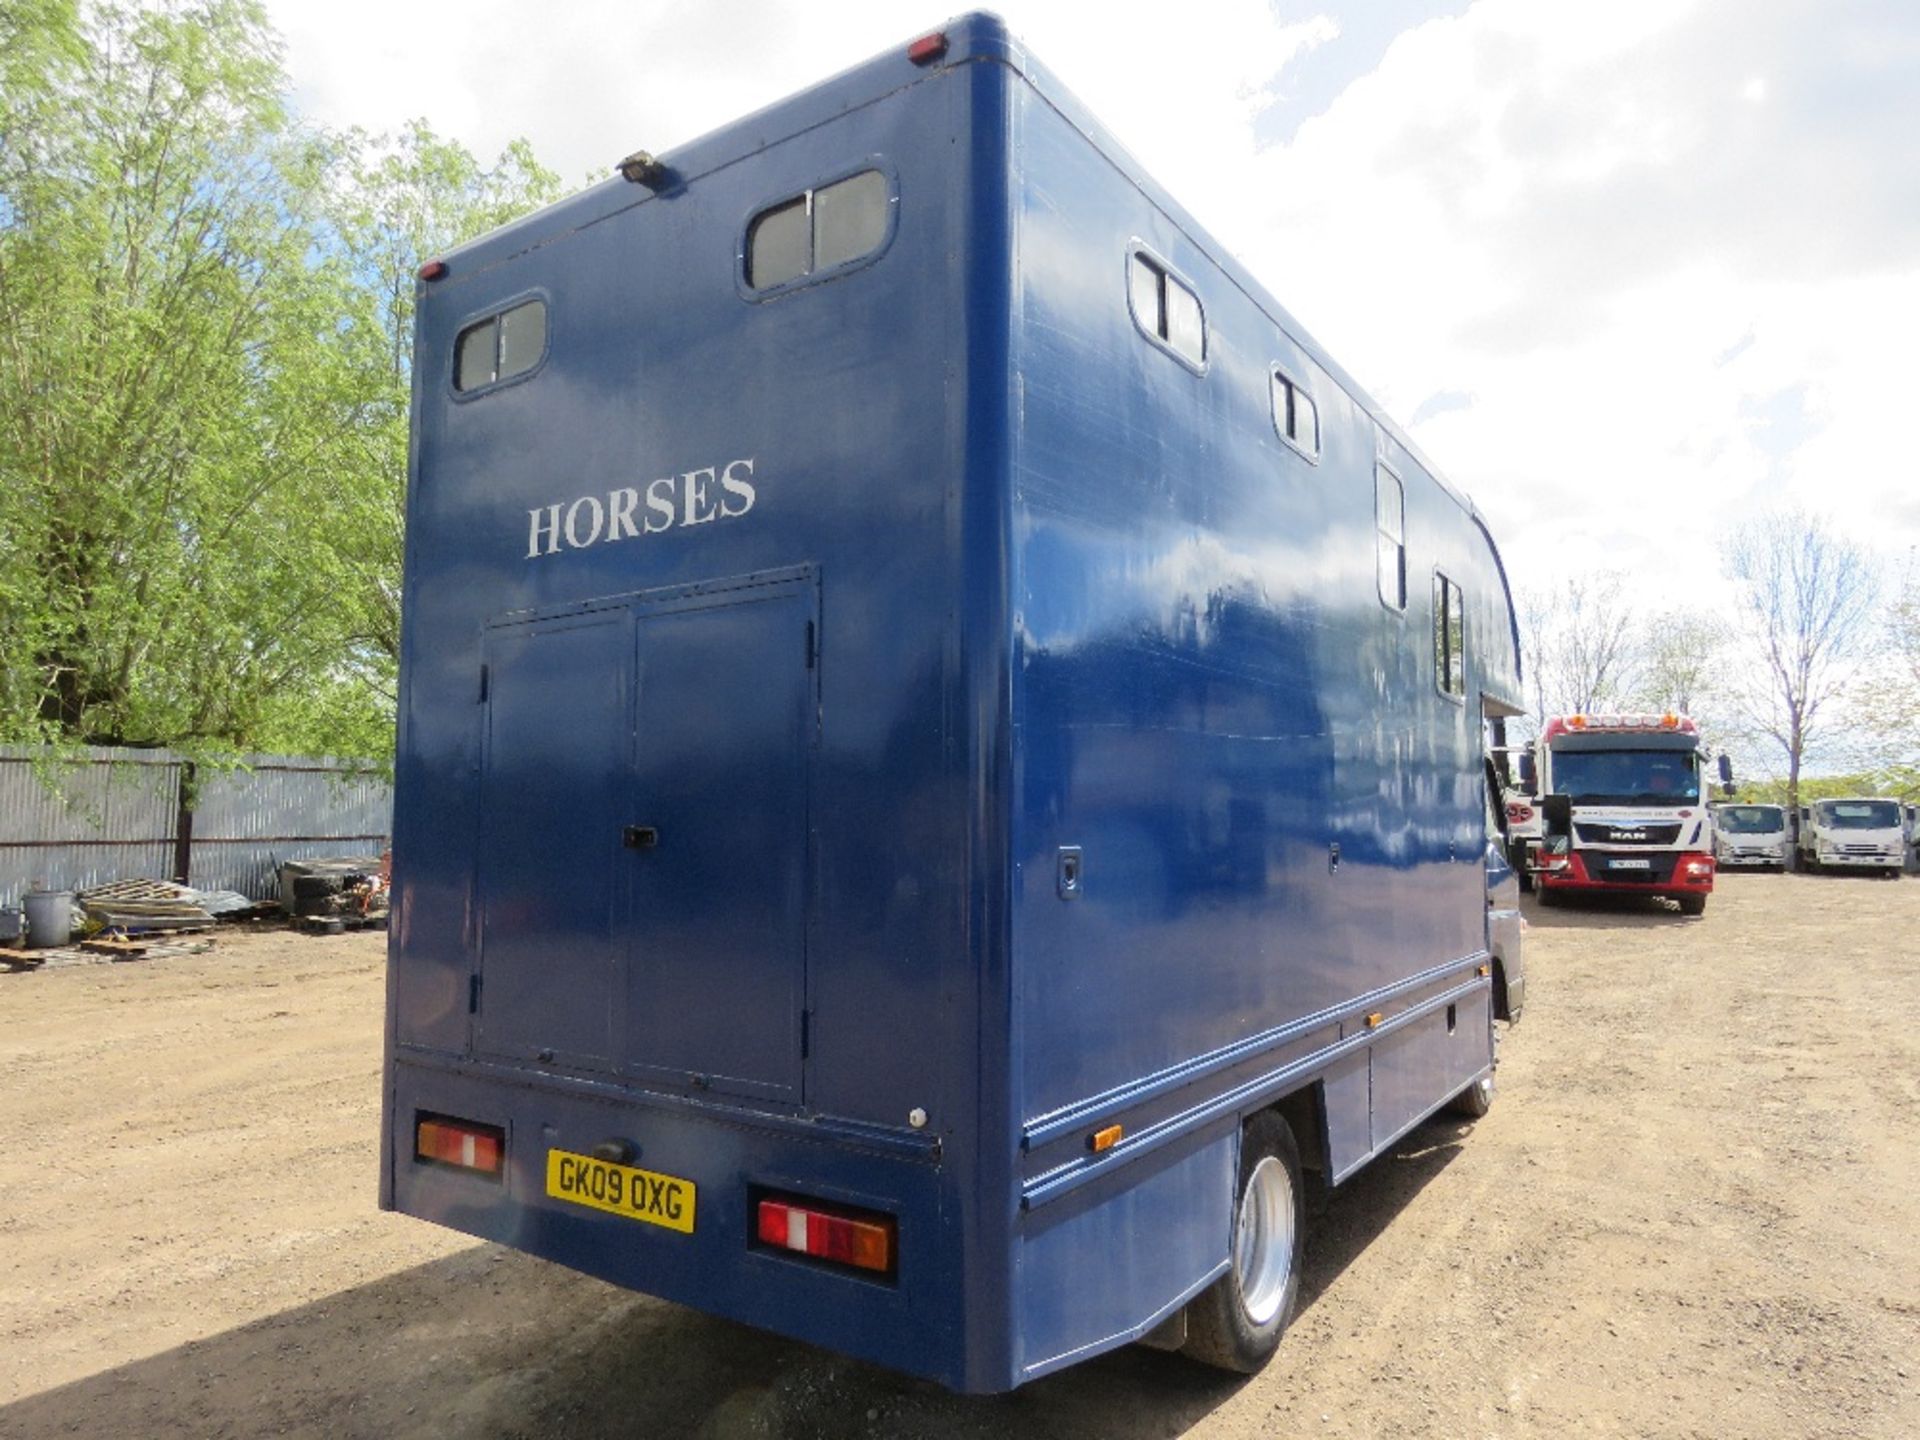 MITSUBISHI CANTER HORSE BOX LORRY REG:GK09 OXG. V5 AND PLATING CERTIFICATE IN OFFICE. MOT EXPIRED. - Image 8 of 24